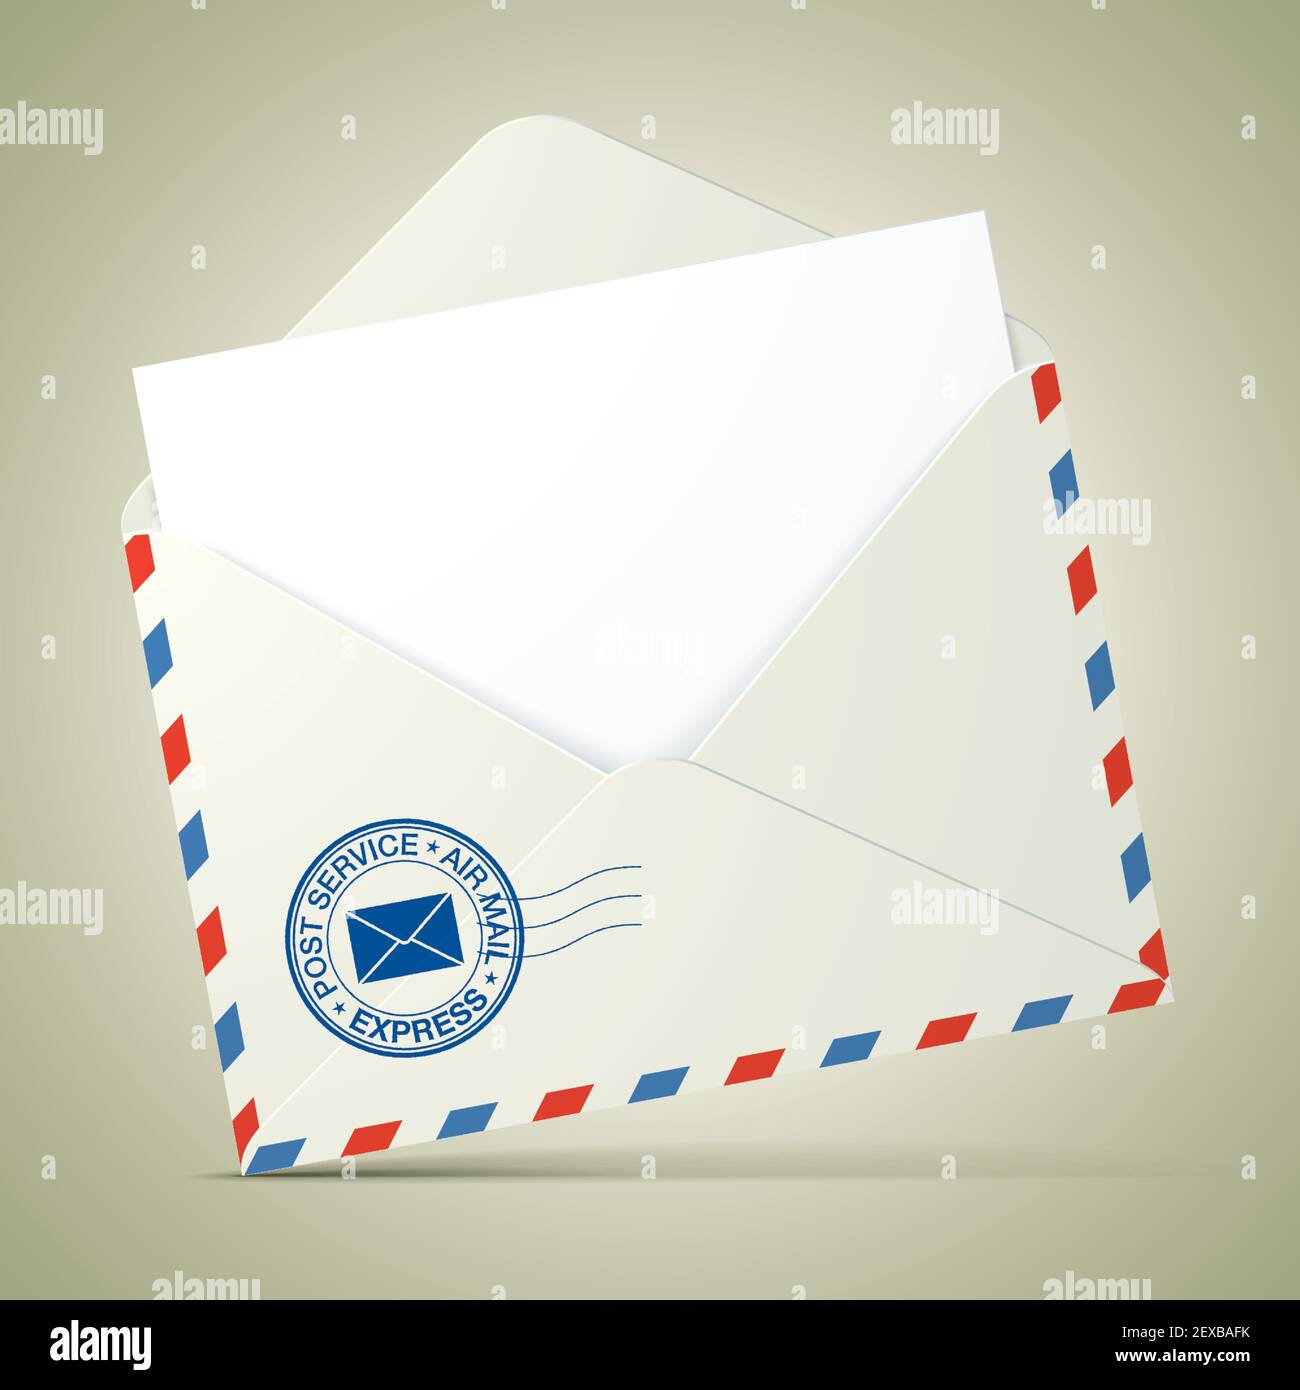 Opened envelope with a blank letter inside, postal service stamp, and red and blue stripe, standing on a khaki color background. Mail envelope vector mockup. Stock Vector